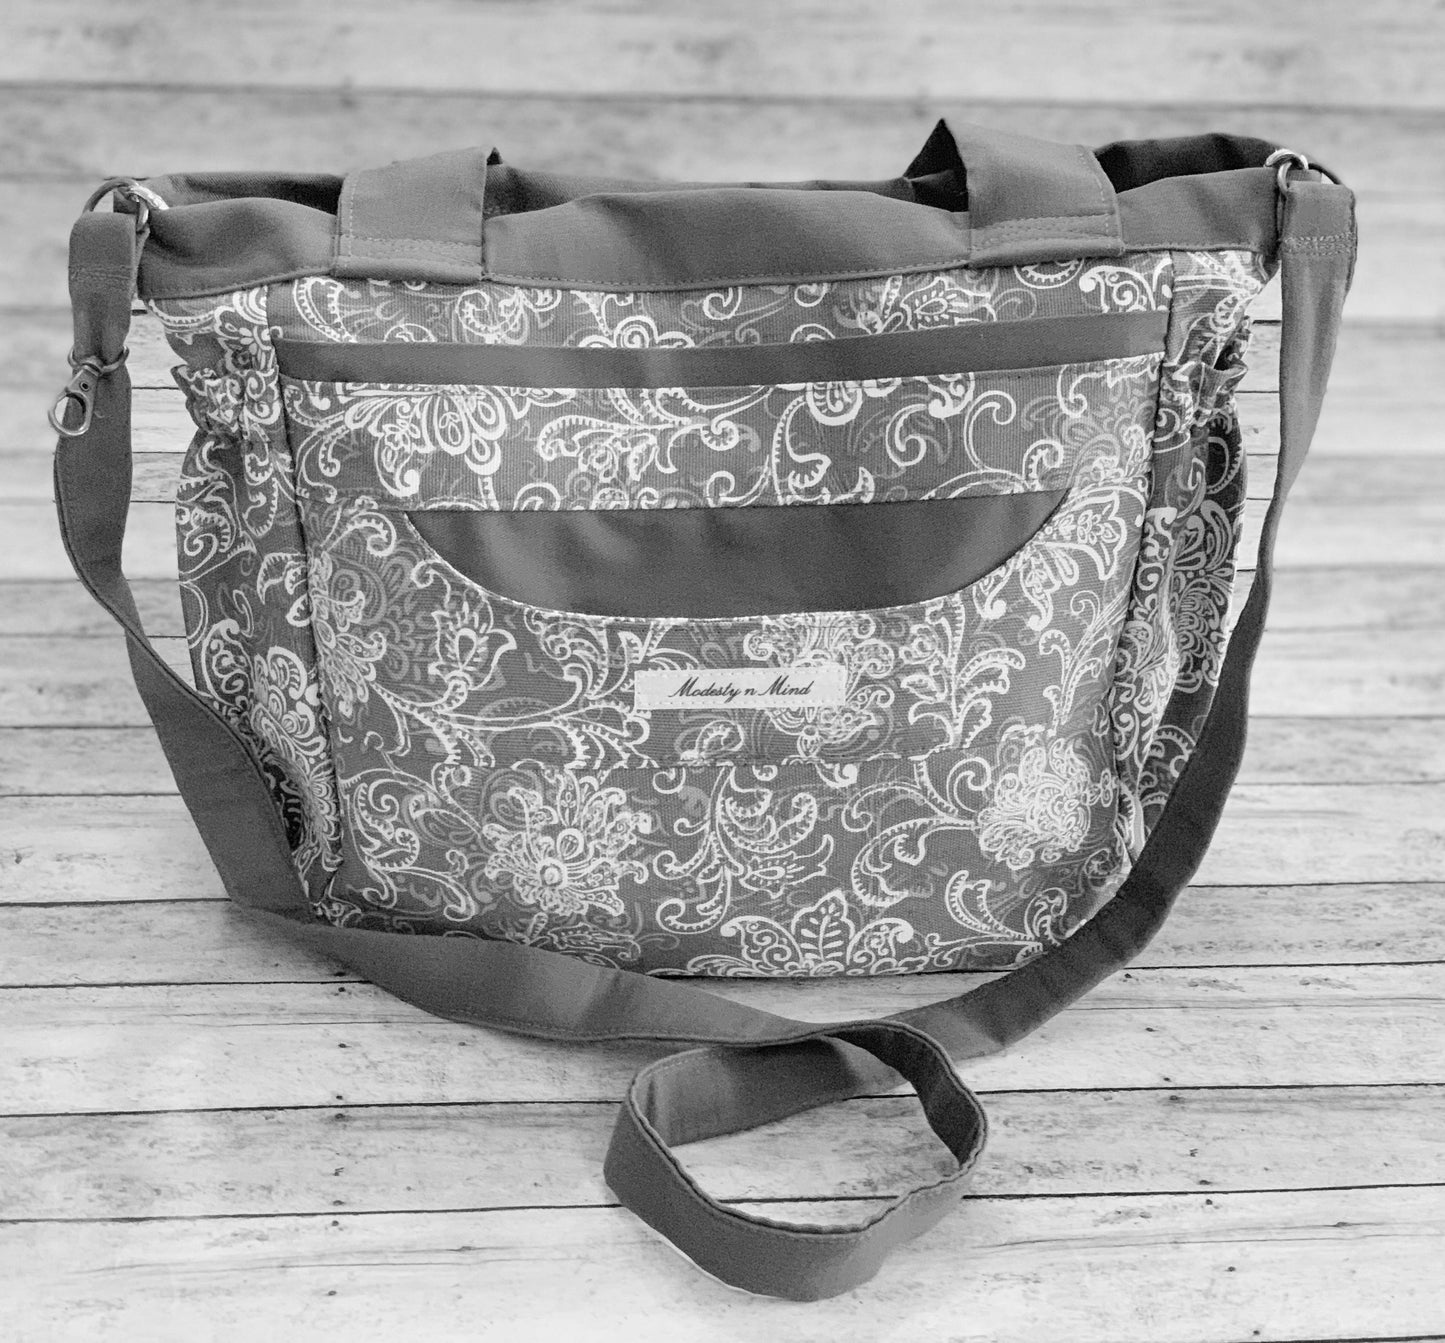 Pink Teal & Gray Floral Mini Everything Tote